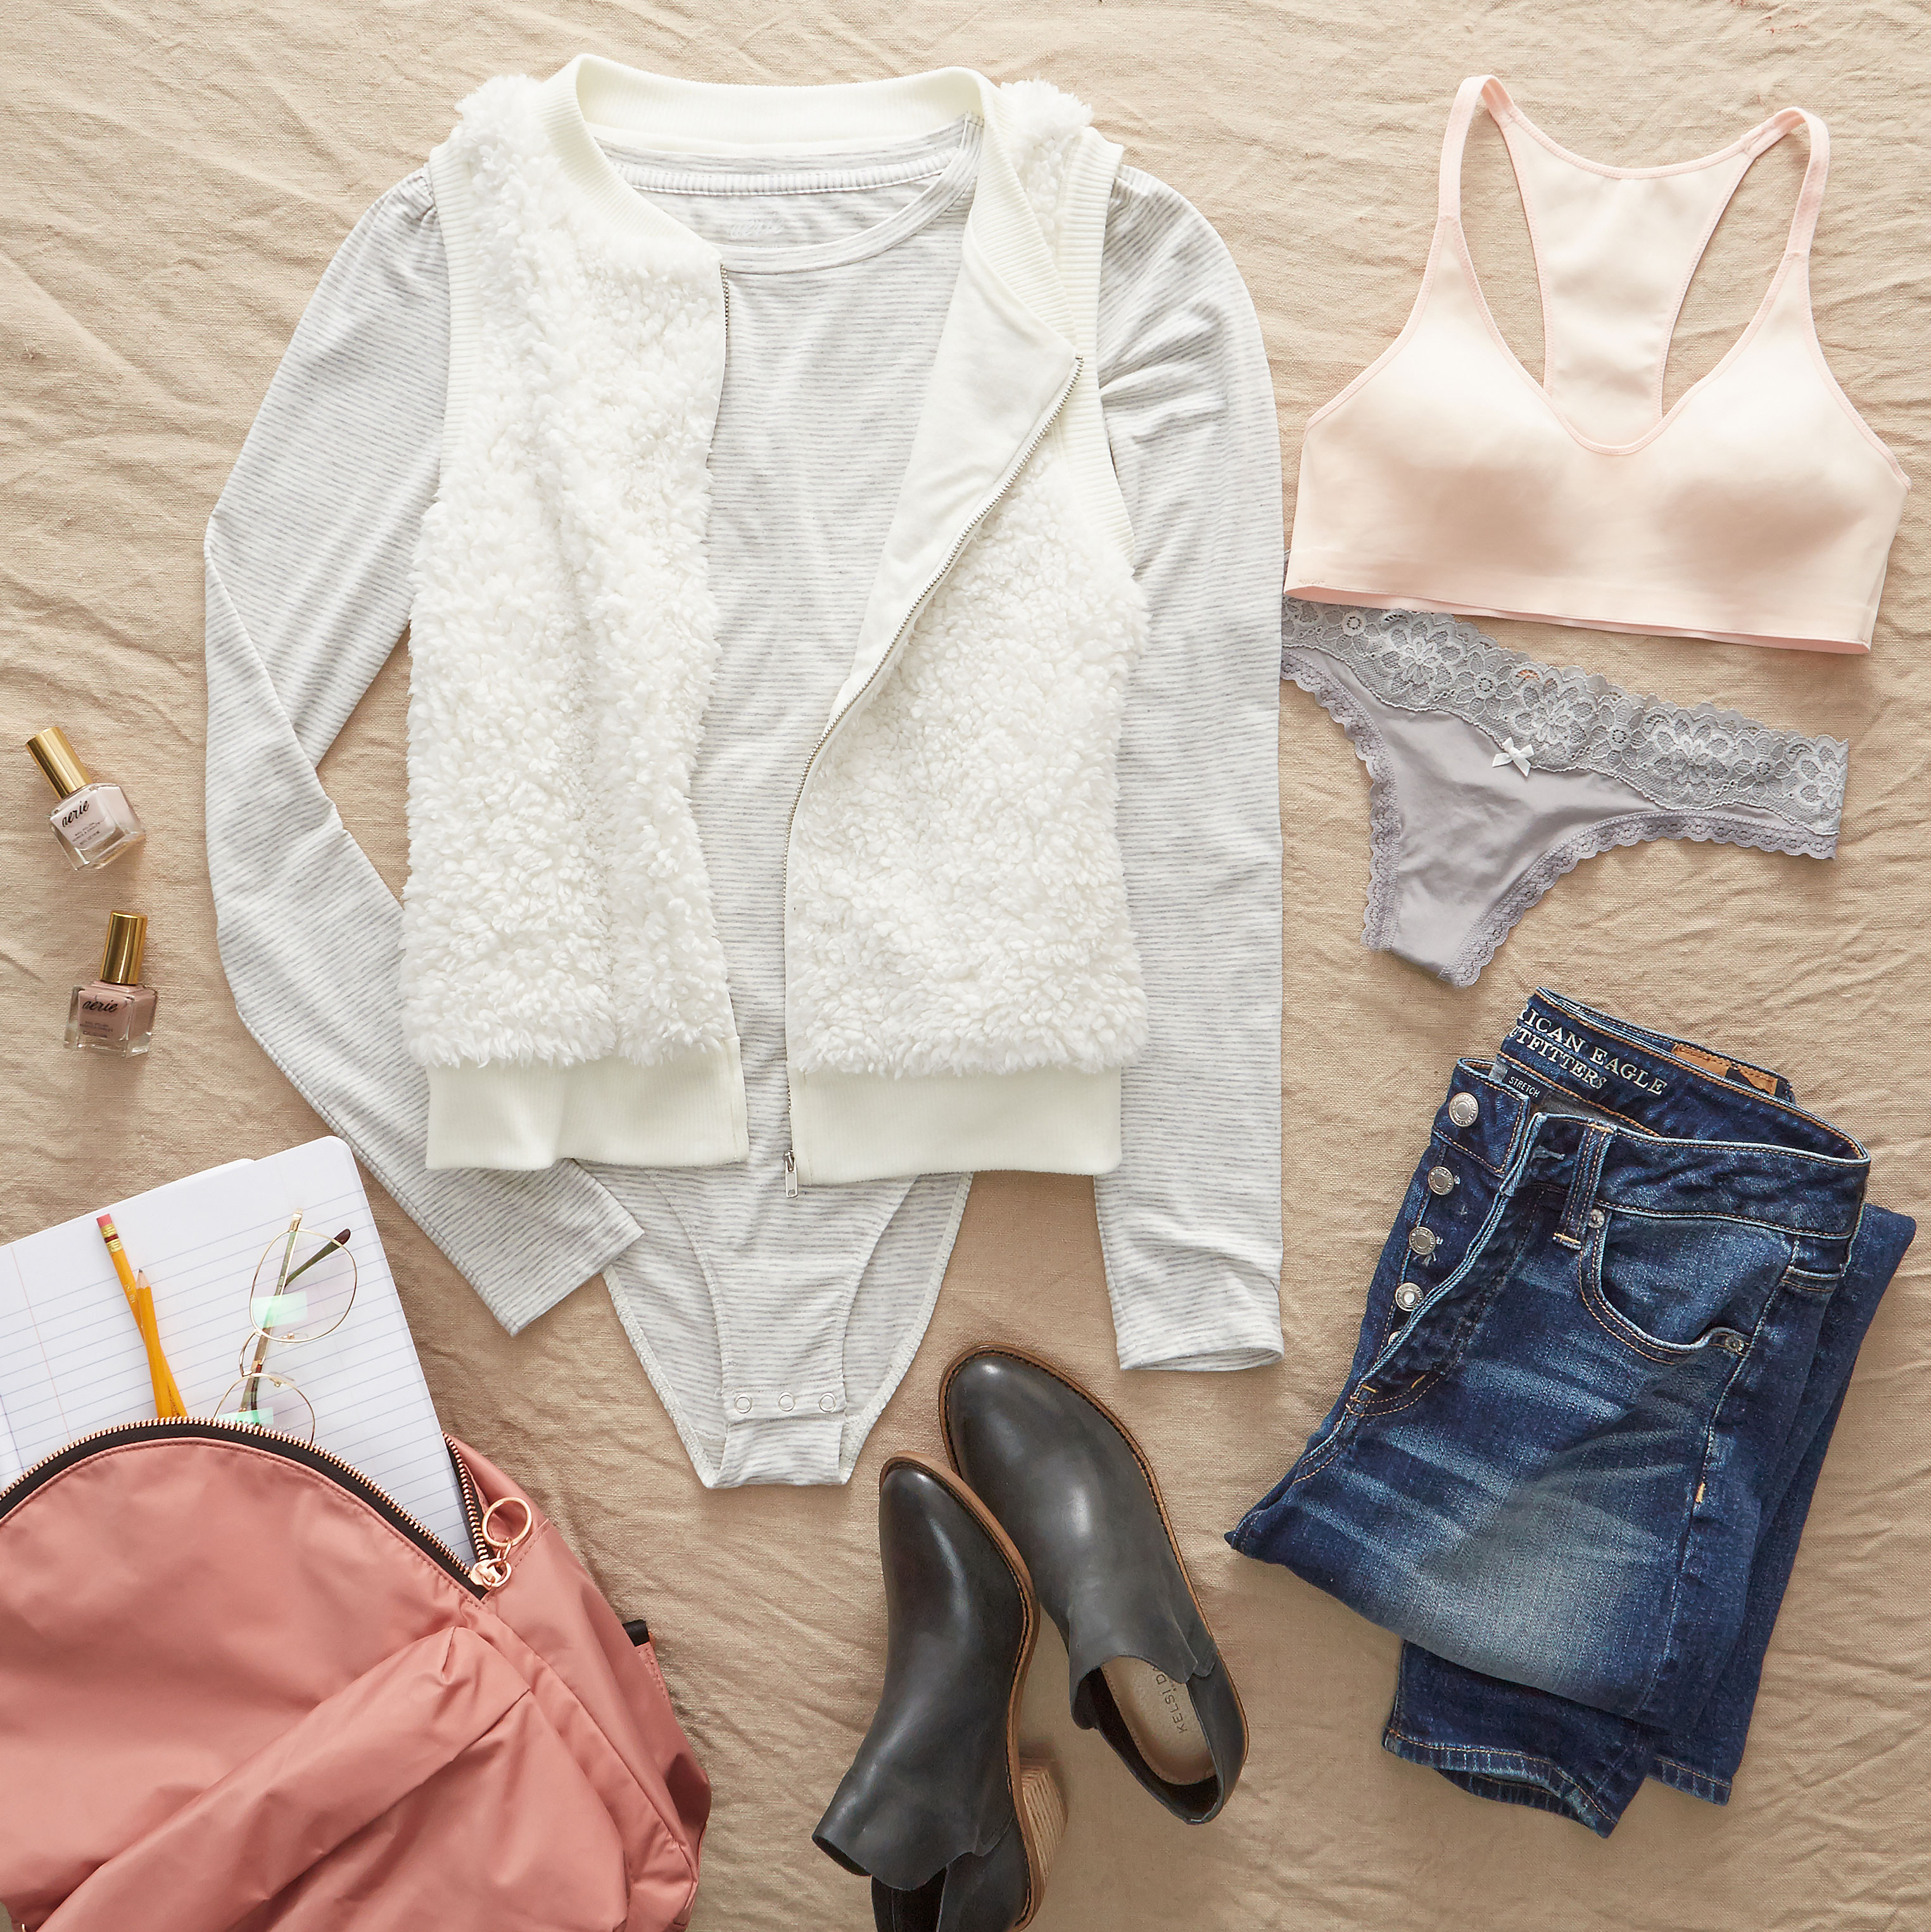 Back to school just got way cuter - #AerieREAL Life